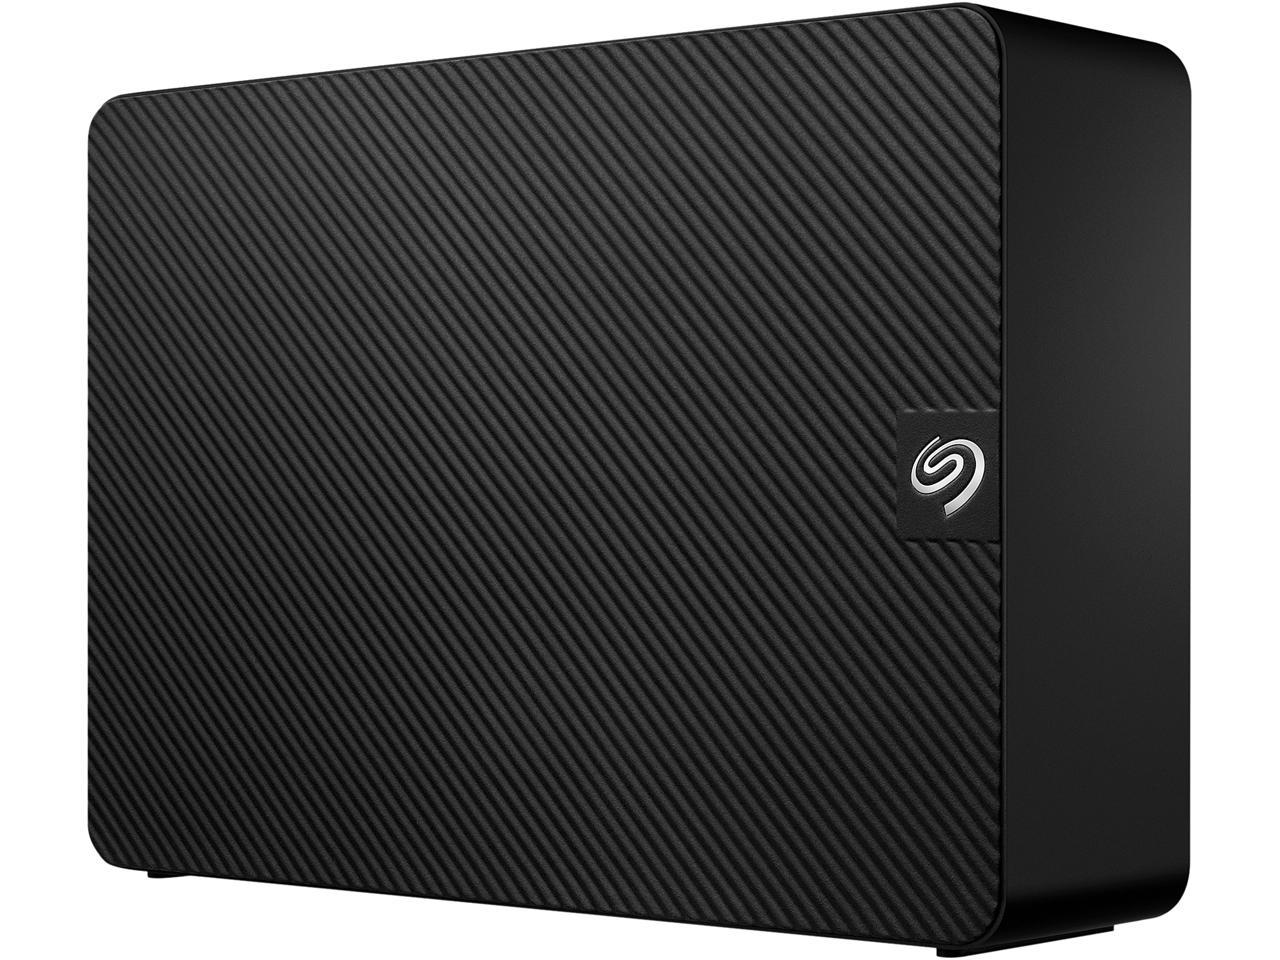 14TB Seagate Expansion Desktop Hard Drive (+Rescue Data Recovery Svcs) $210